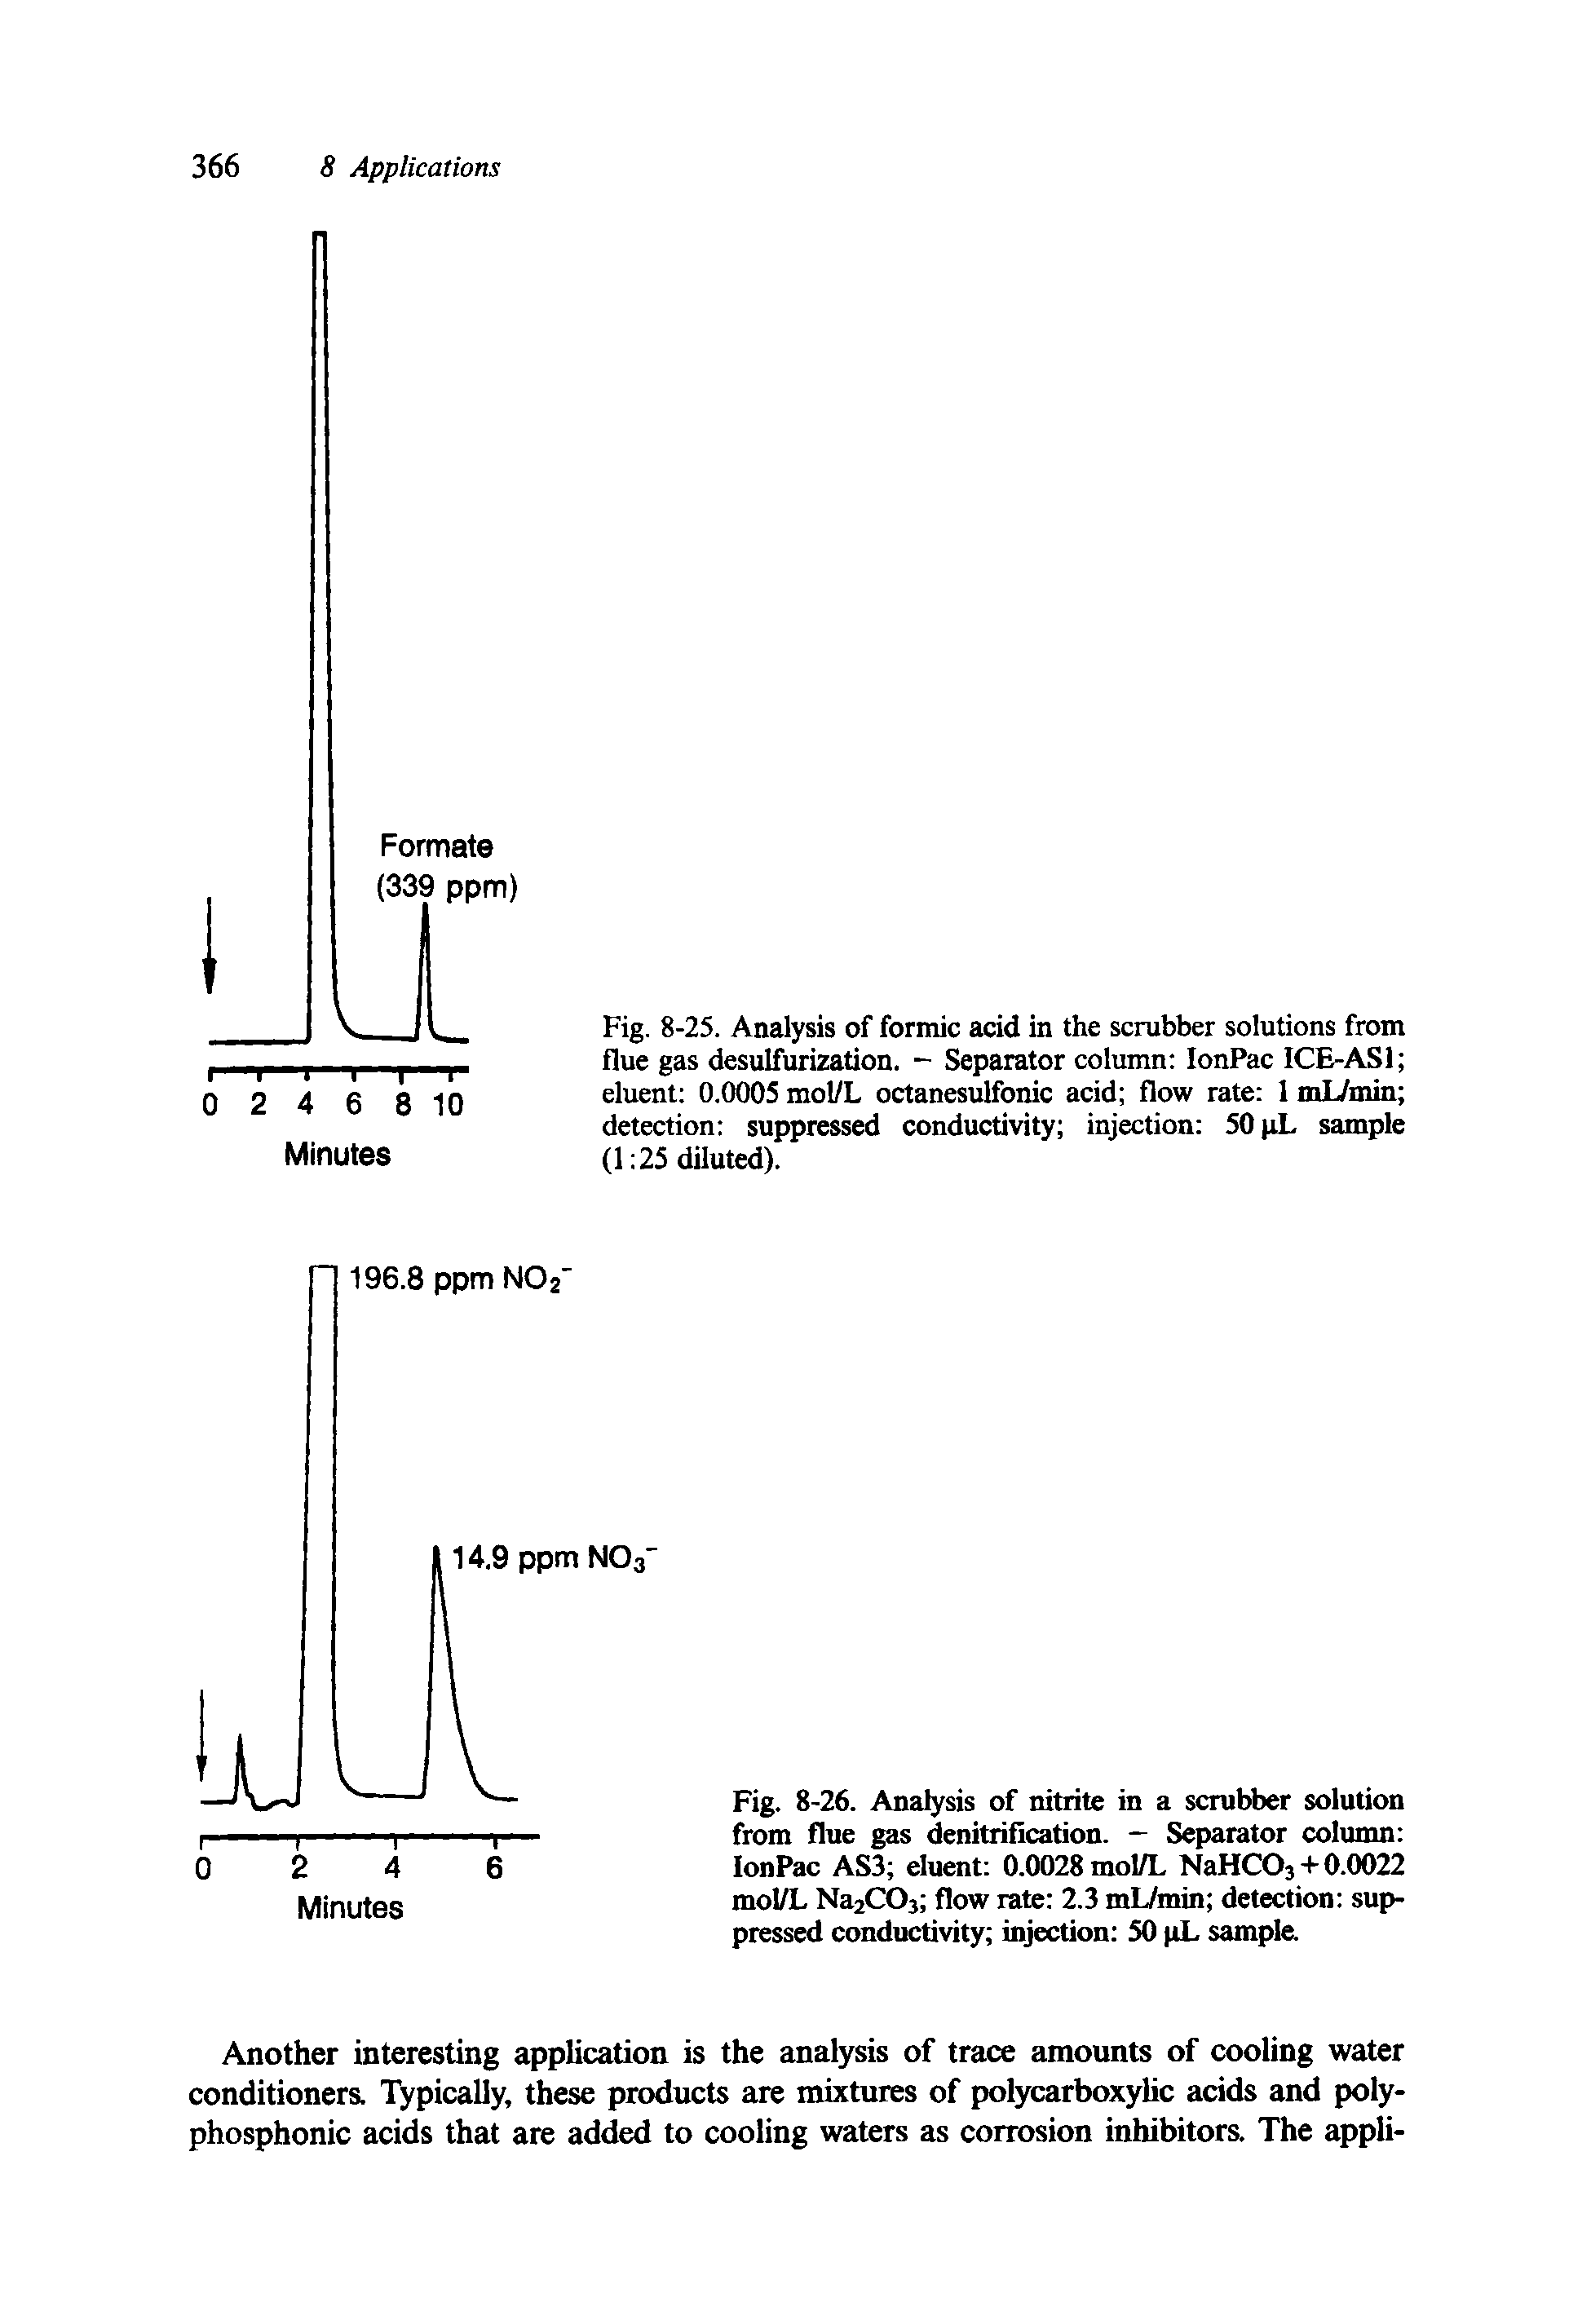 Fig. 8-26. Analysis of nitrite in a scrubber solution from flue gas denitrification. - Separator column IonPac AS3 eluent 0.0028 mol/L NaHC03 + 0.0022 mol/L Na2C03 flow rate 2.3 mL/min detection suppressed conductivity injection 50 pL sample...